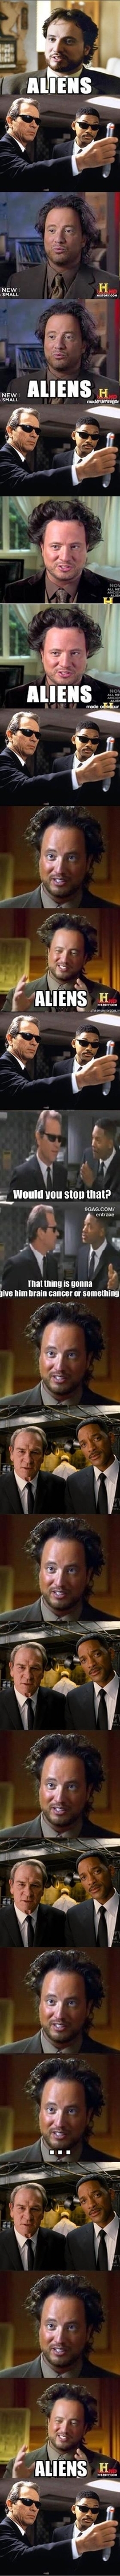 The Men in Black try to stop the Aliens guy